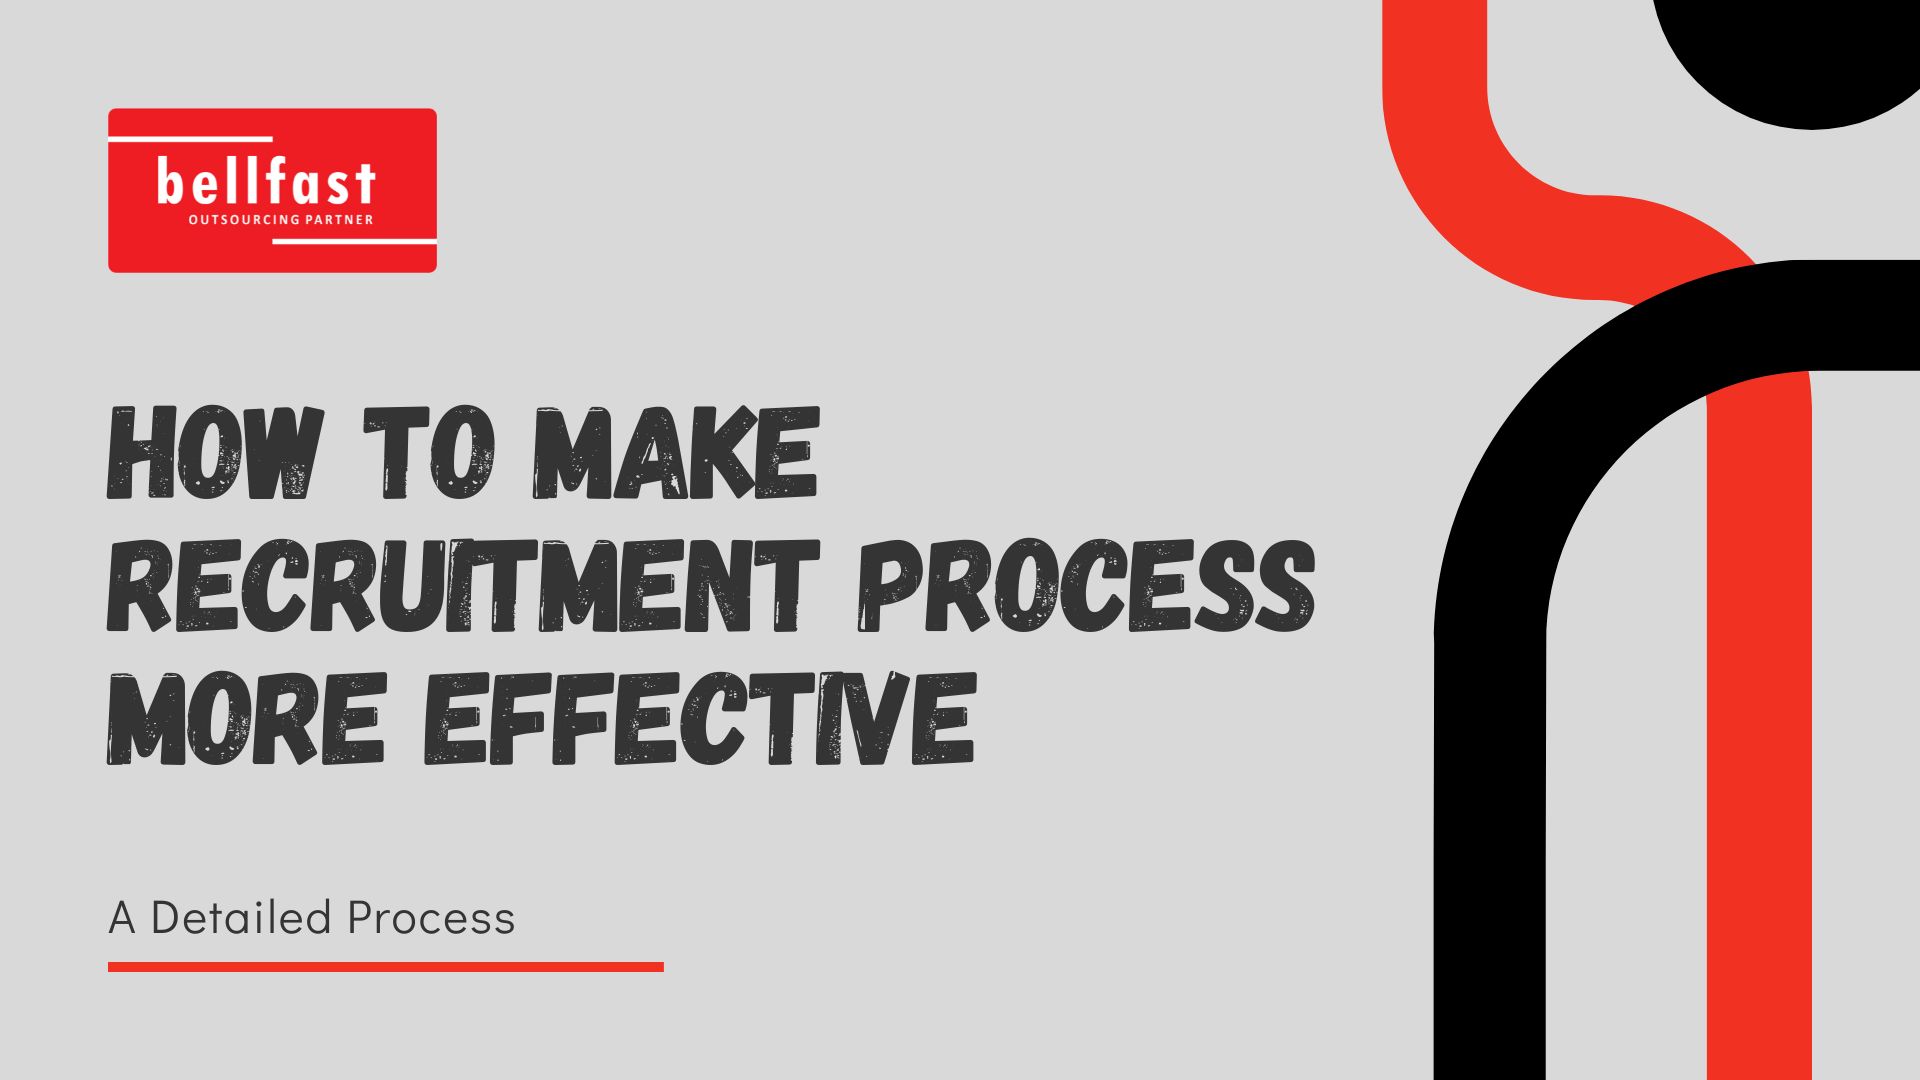 How to Make Recruitment Process More Effective